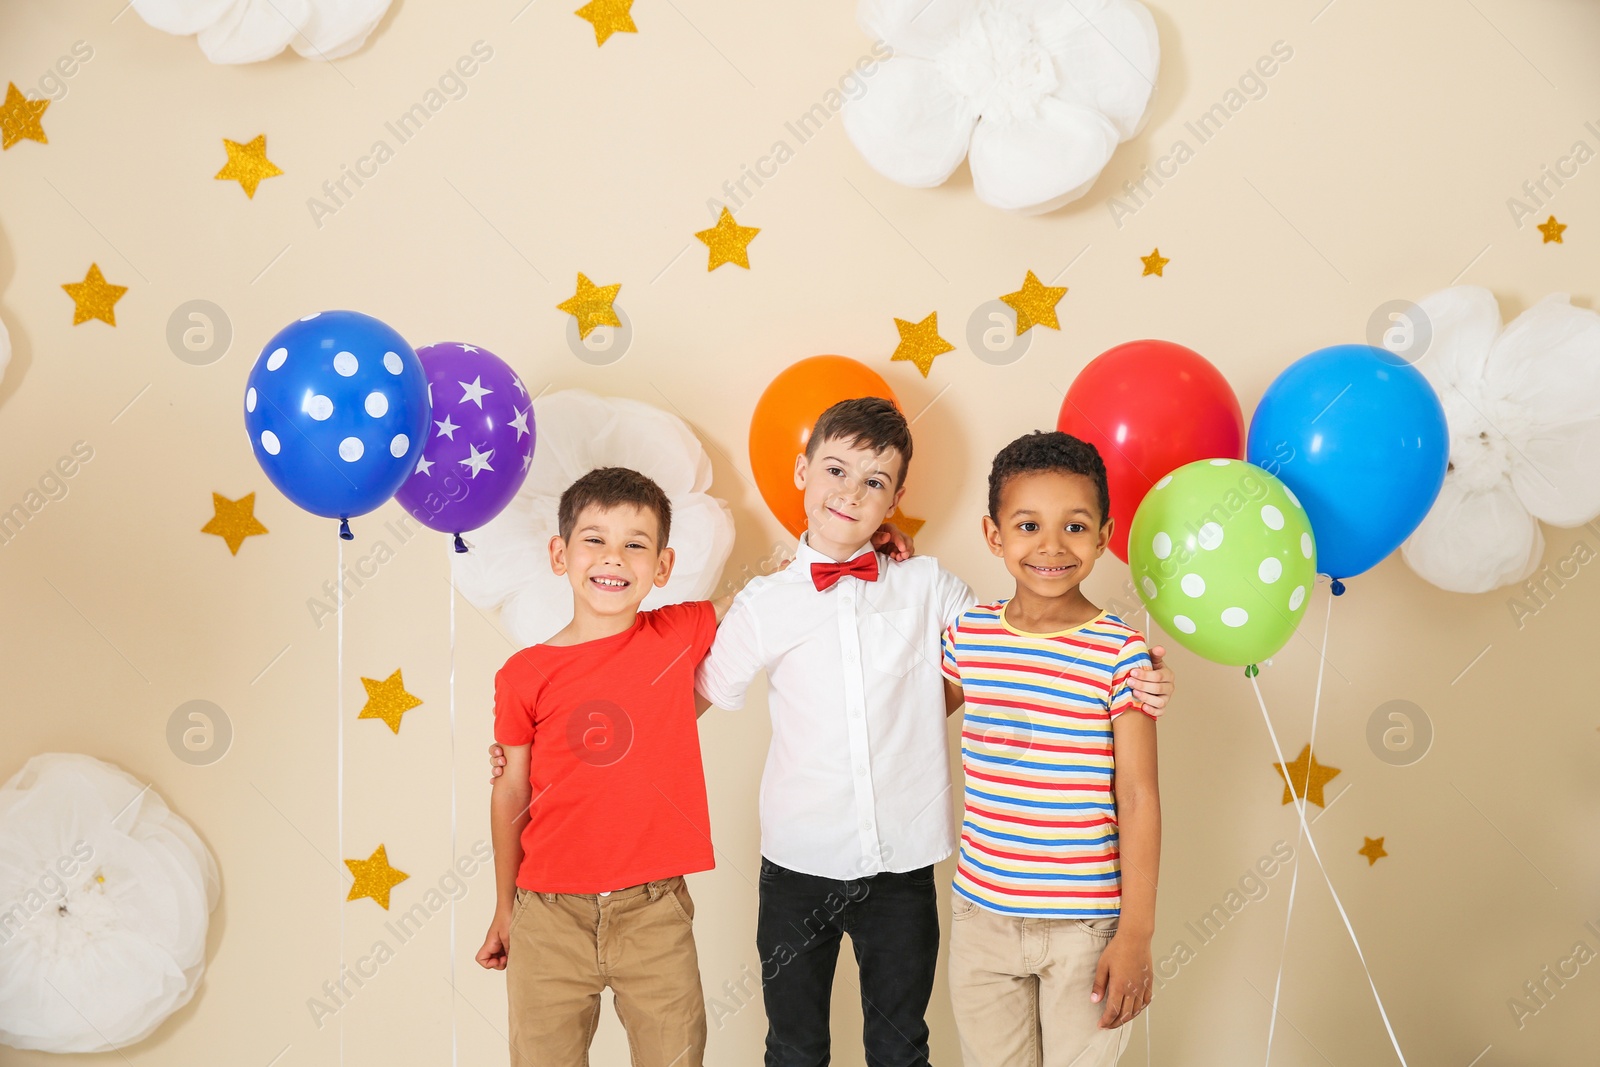 Photo of Adorable little boys and decor for birthday party on color background